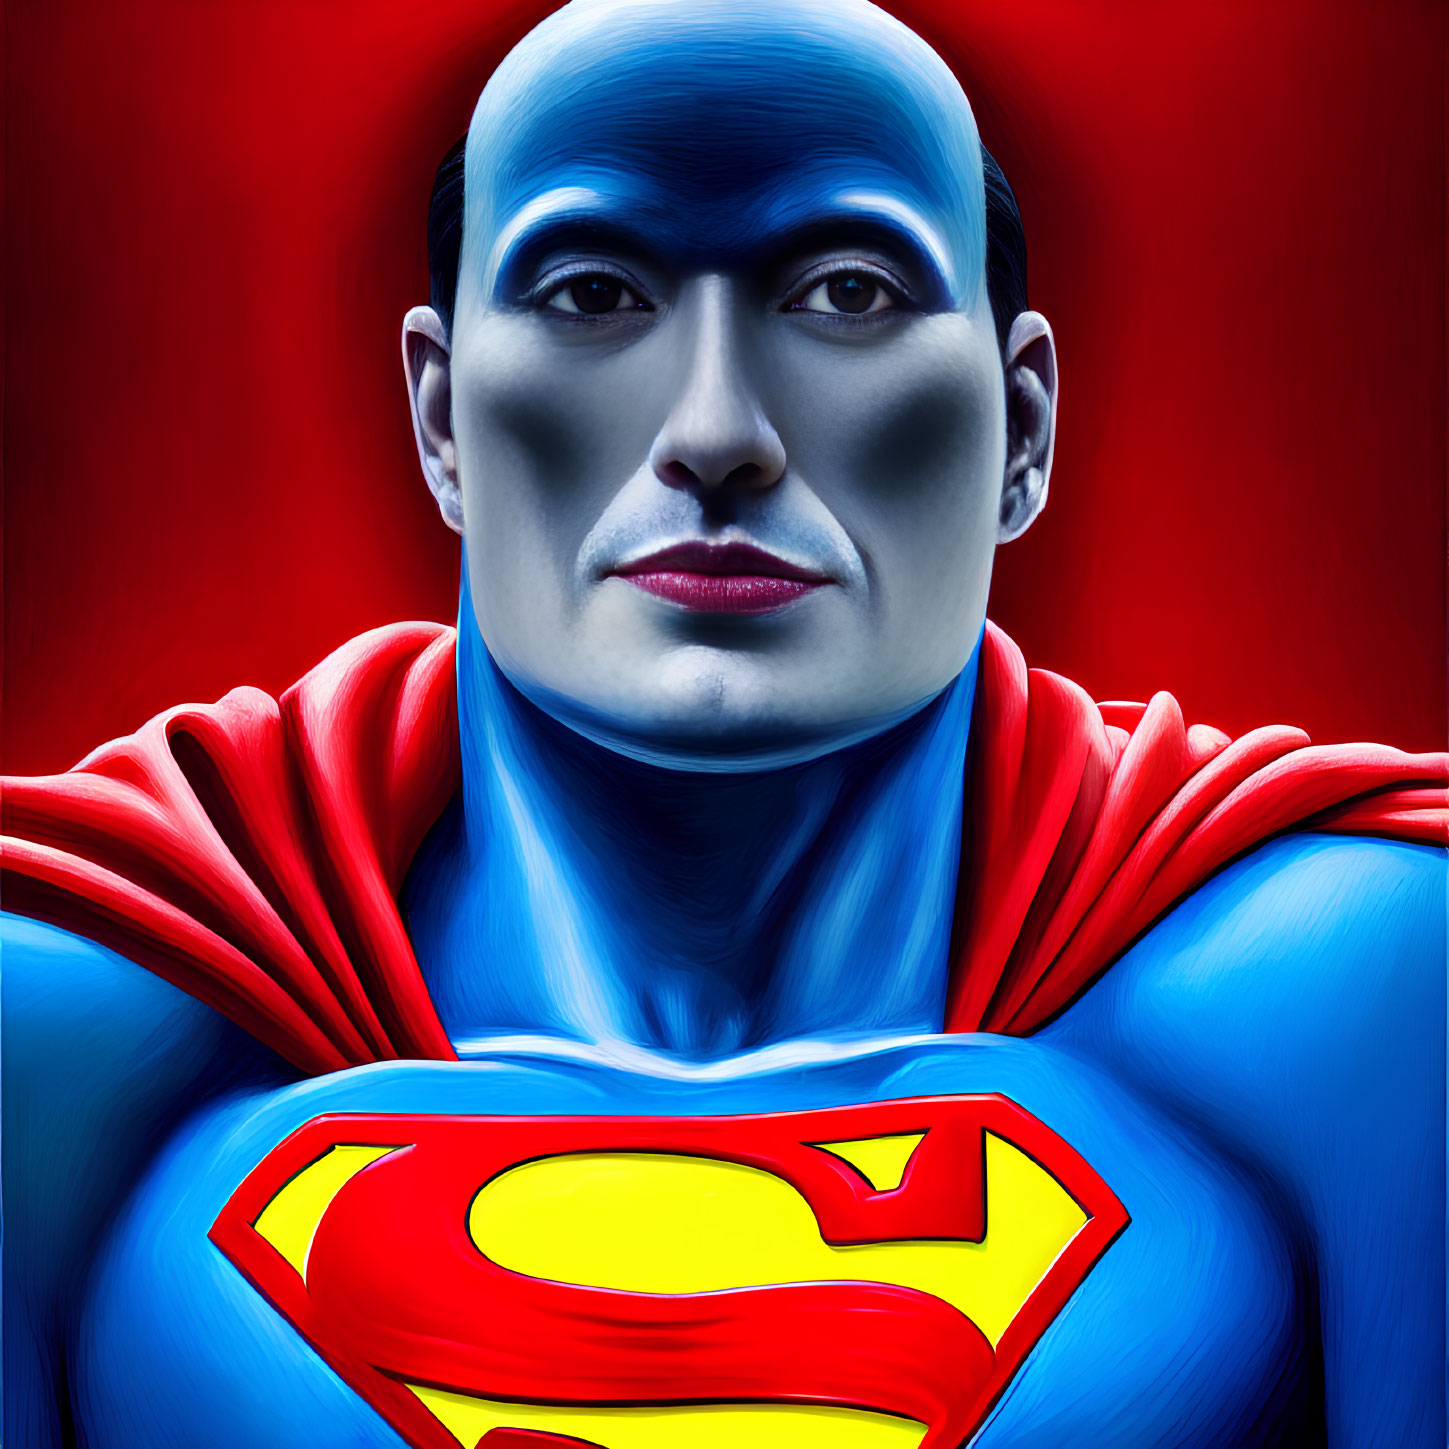 Person in Superman costume with 'S' logo on blue and red background